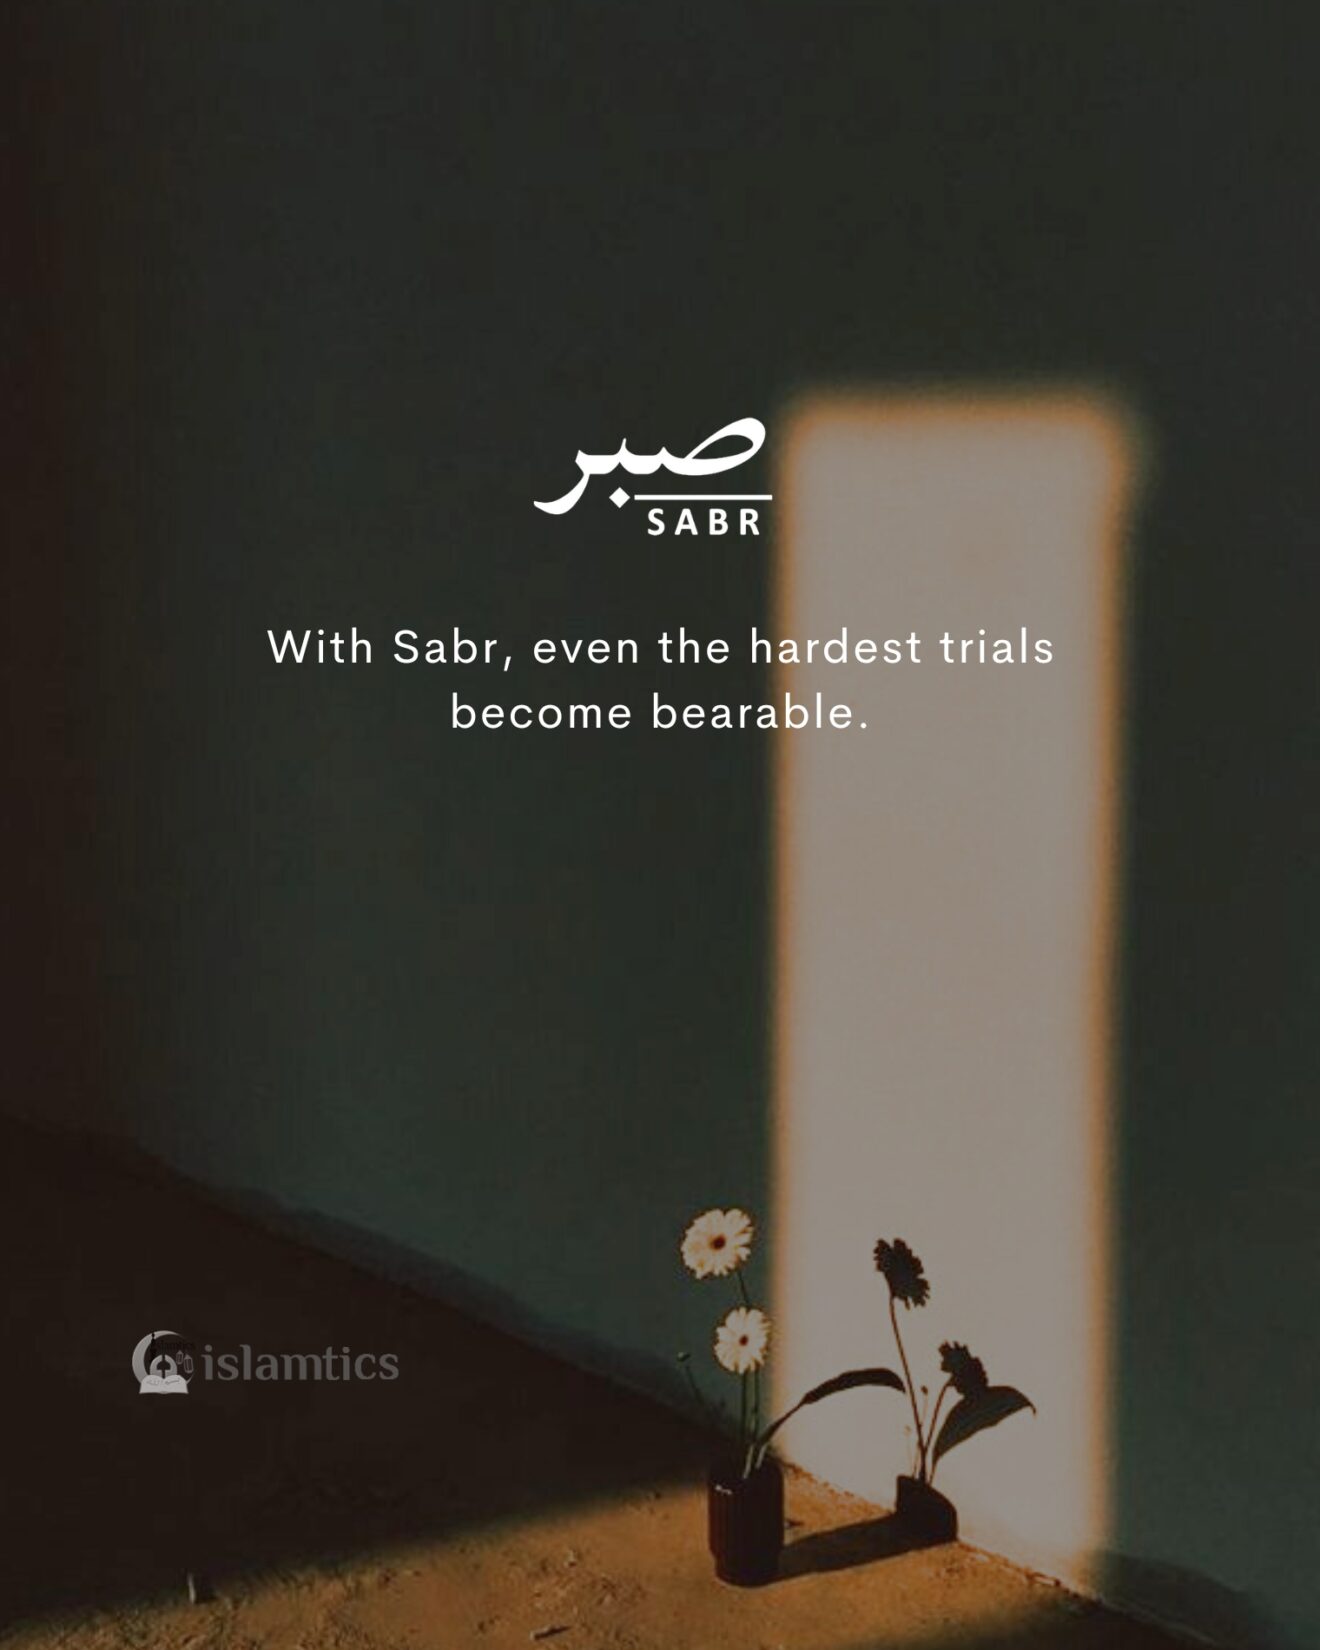 With Sabr, even the hardest trials become bearable.